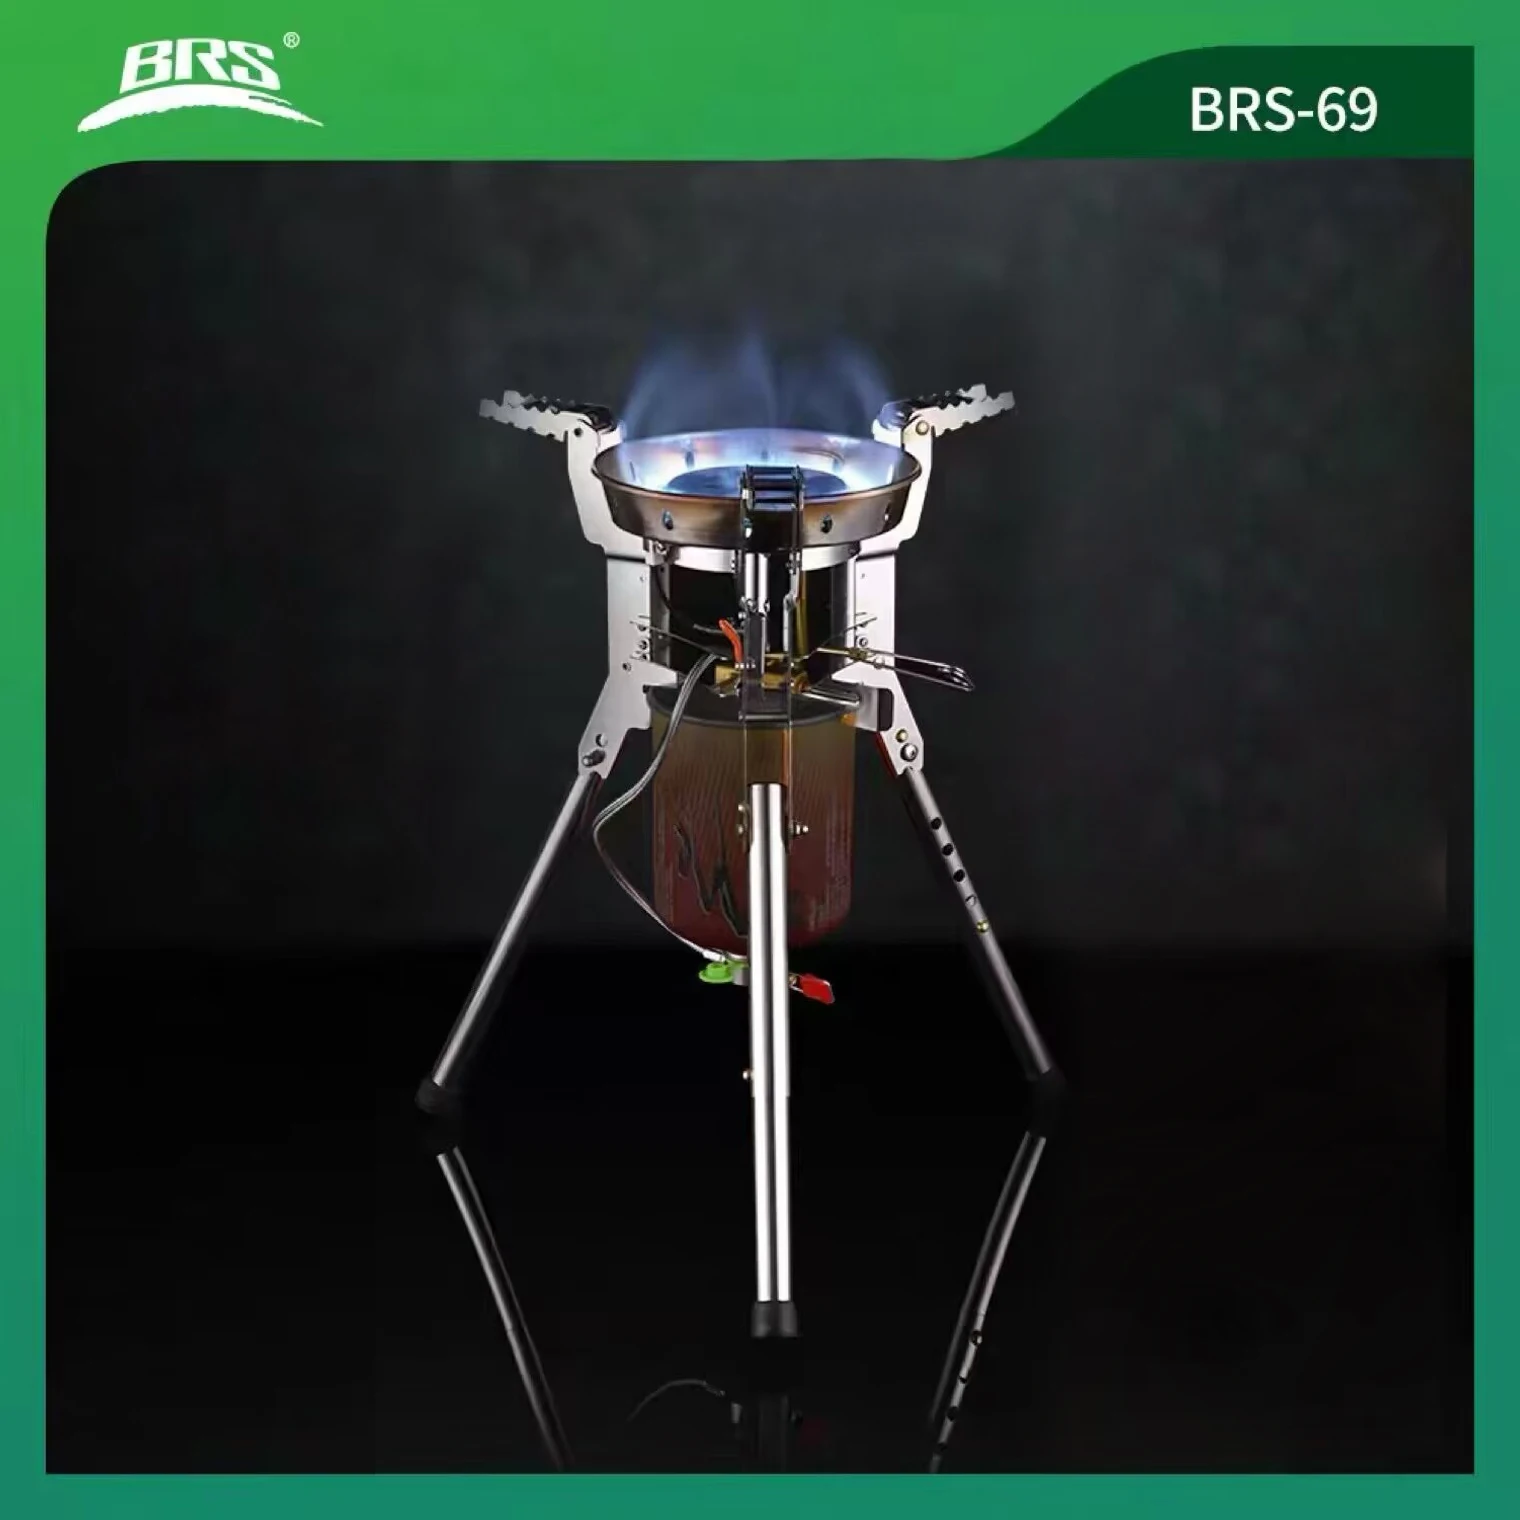 BRS-69 High Power 4360W Outdoor Camping Gas Stove Foldable G